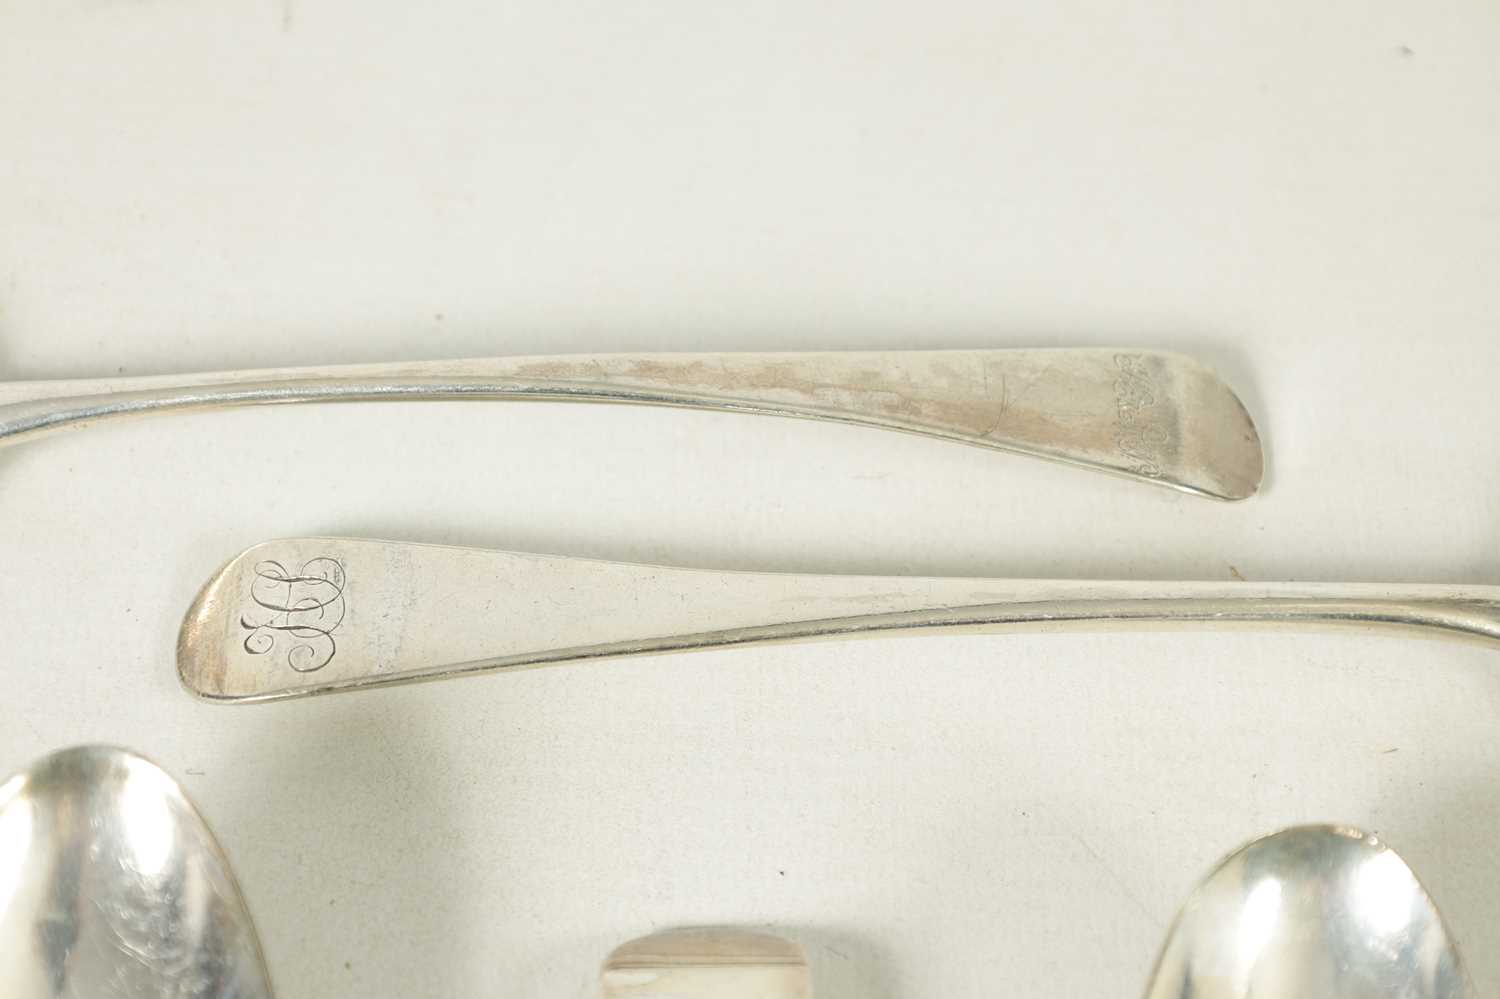 A MATCHED SET OF 11 GEORGE III OLD ENGLISH AND FIDDLE PATTERN SILVER SERVING/SOUP SPOONS - Image 3 of 7